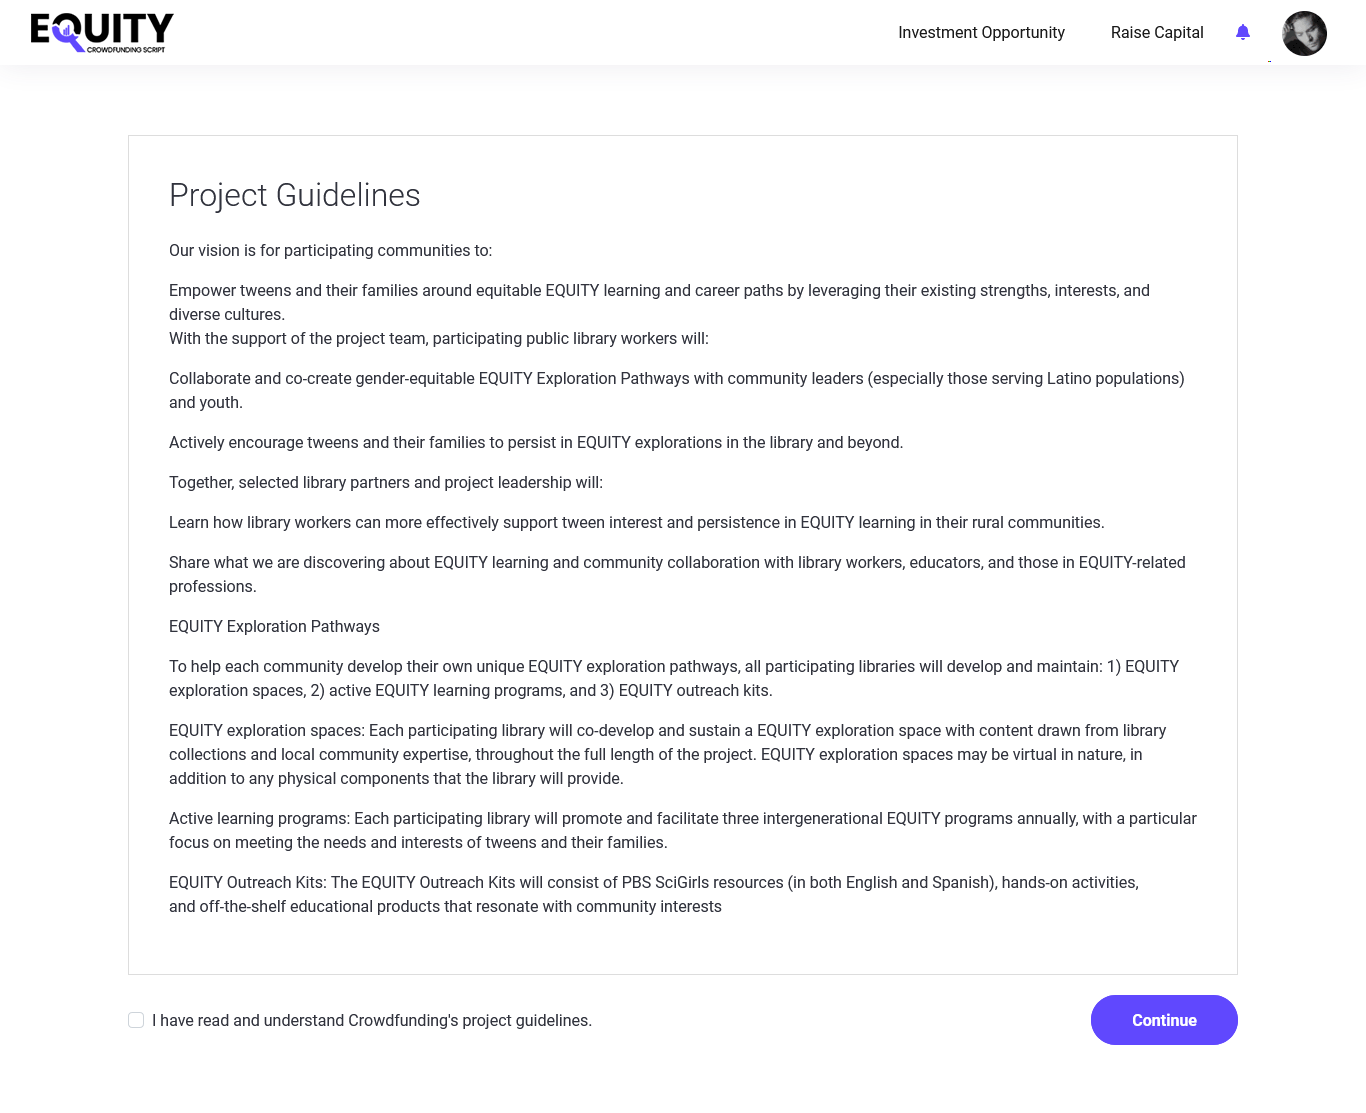 Project guidelines in the crowdfunding software.